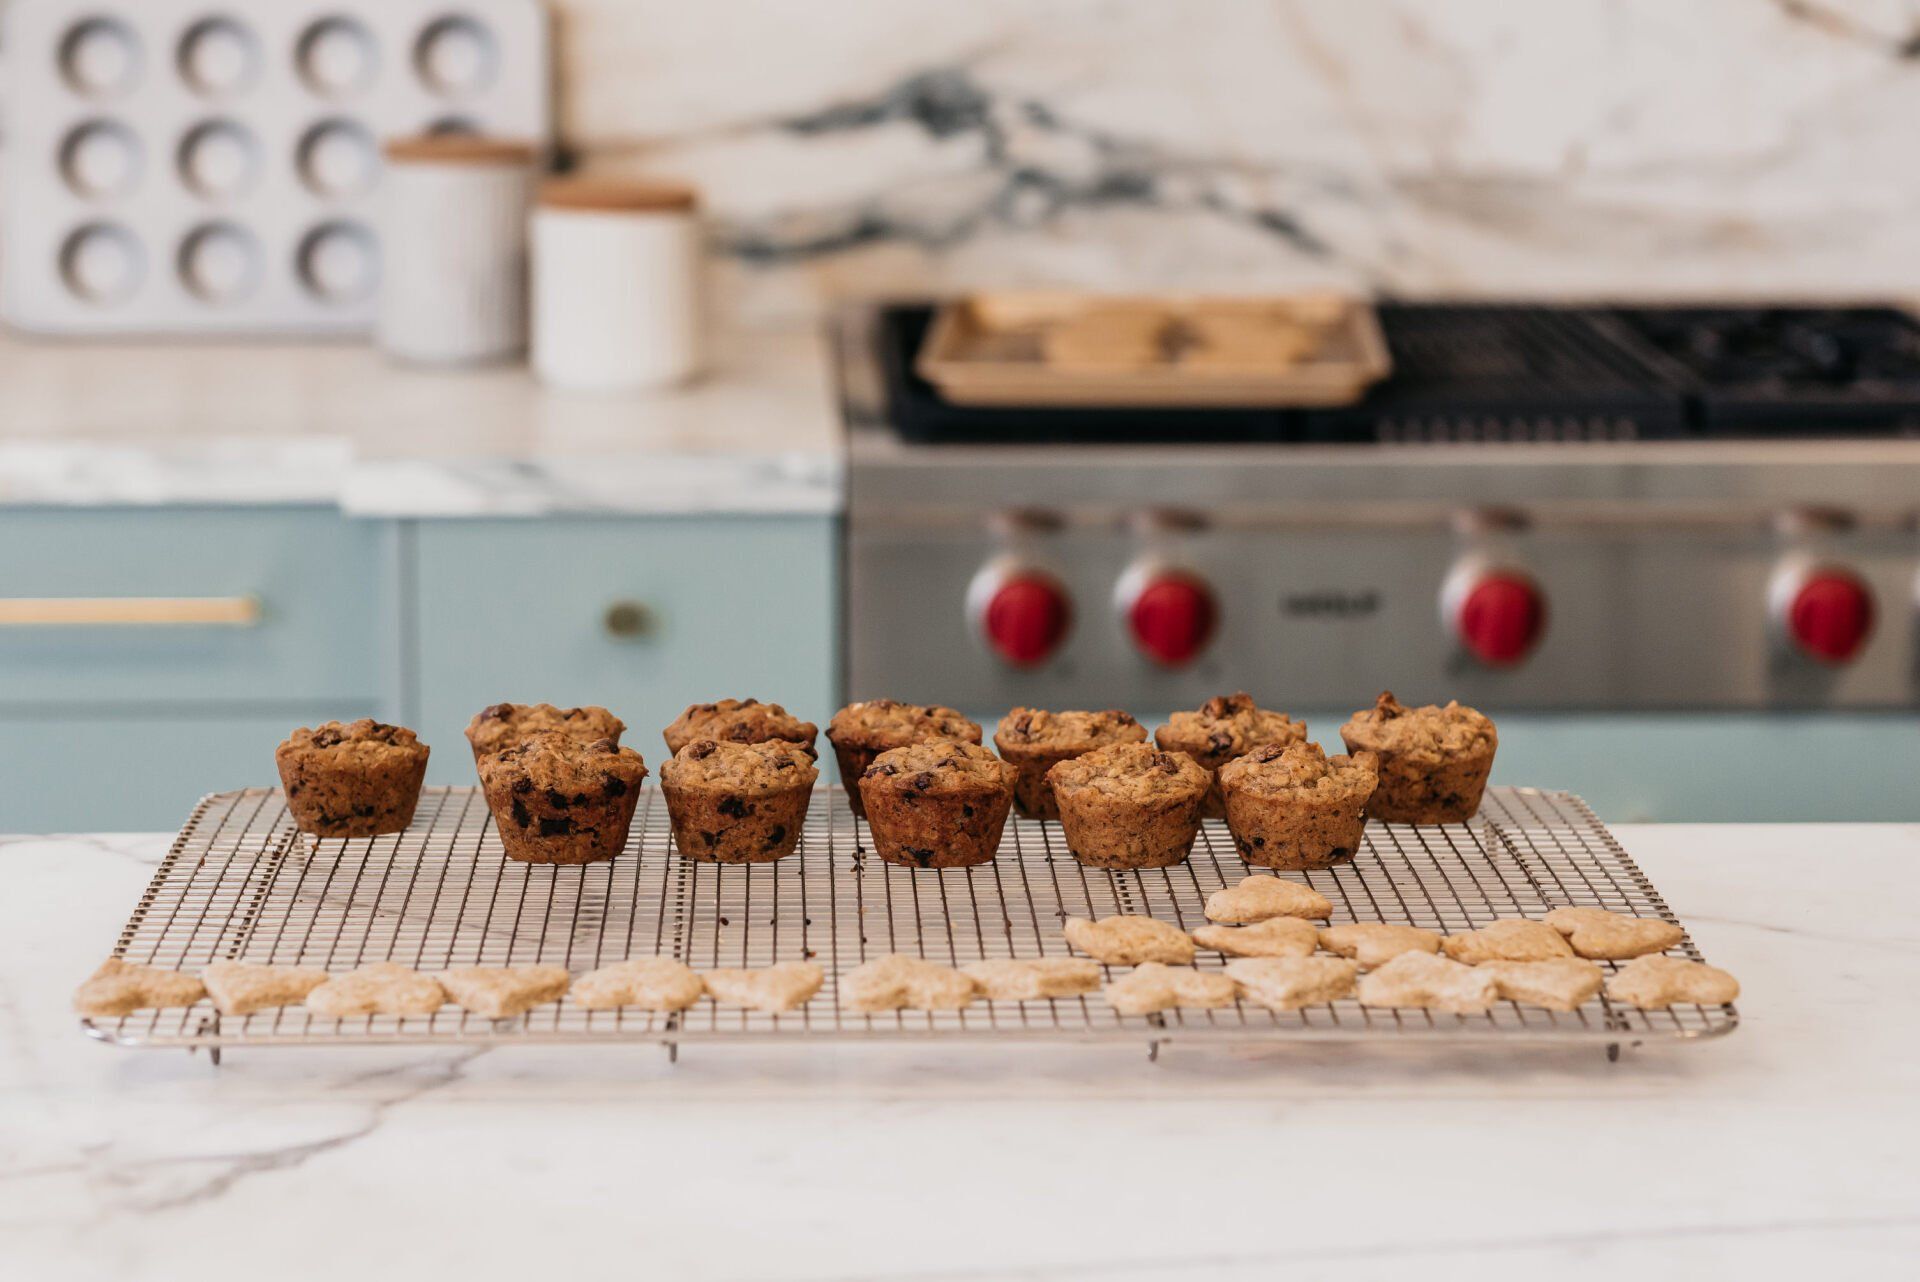 A tray of freshly baked muffins and cookies on top of an elegant marble kitchen counter